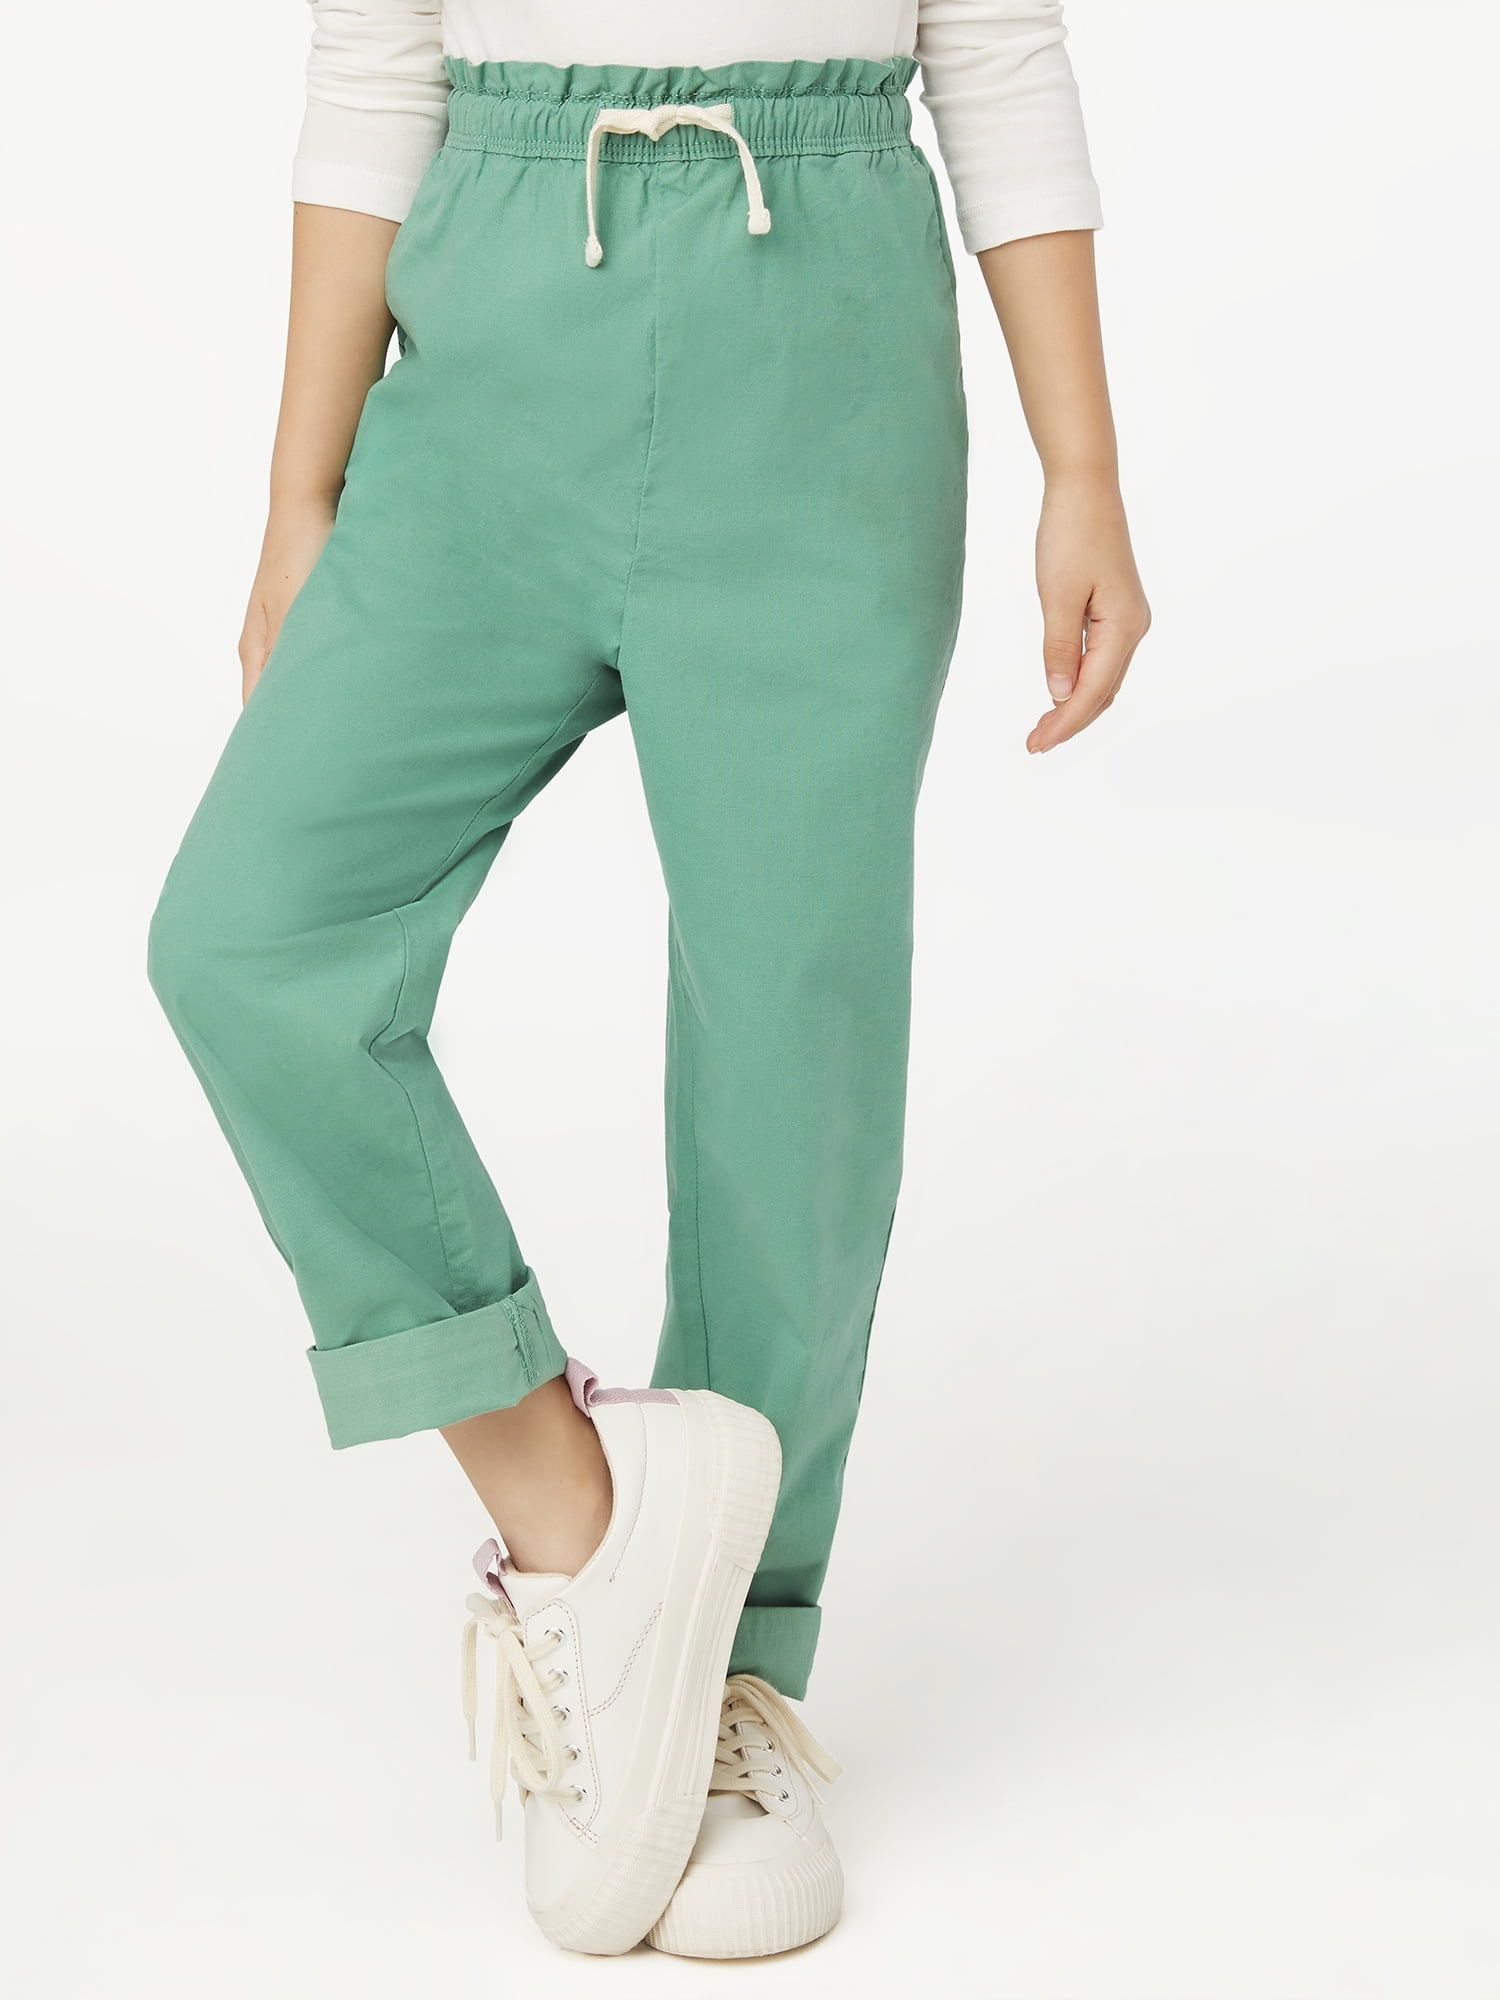 Free Assembly Girls Pull-On Dock Pants, Sizes 5-18